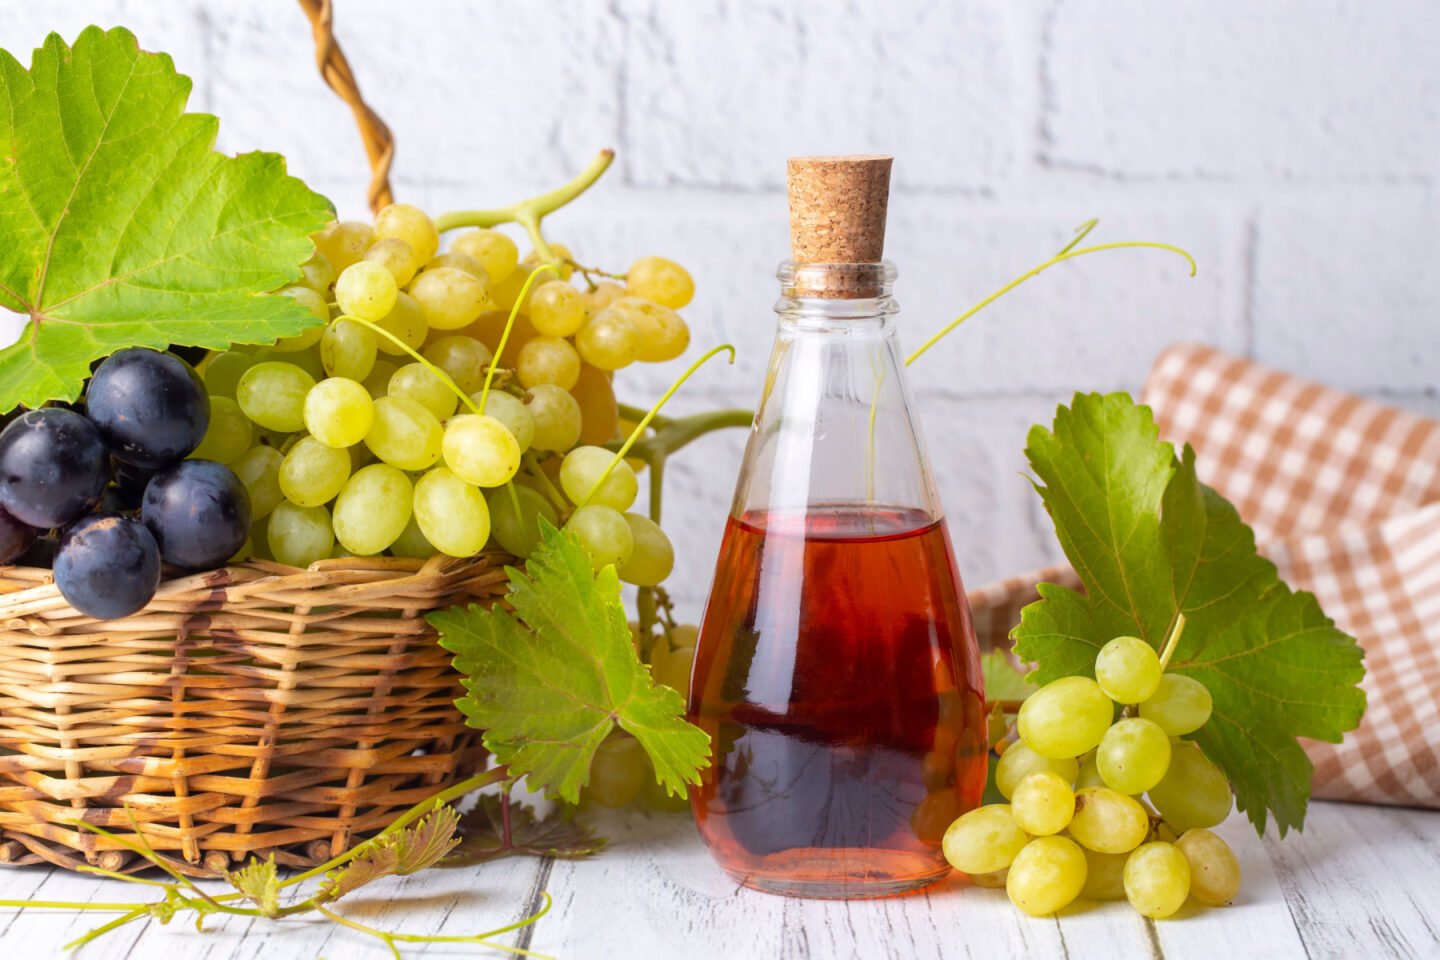 wine vinegar with baskets of grapes